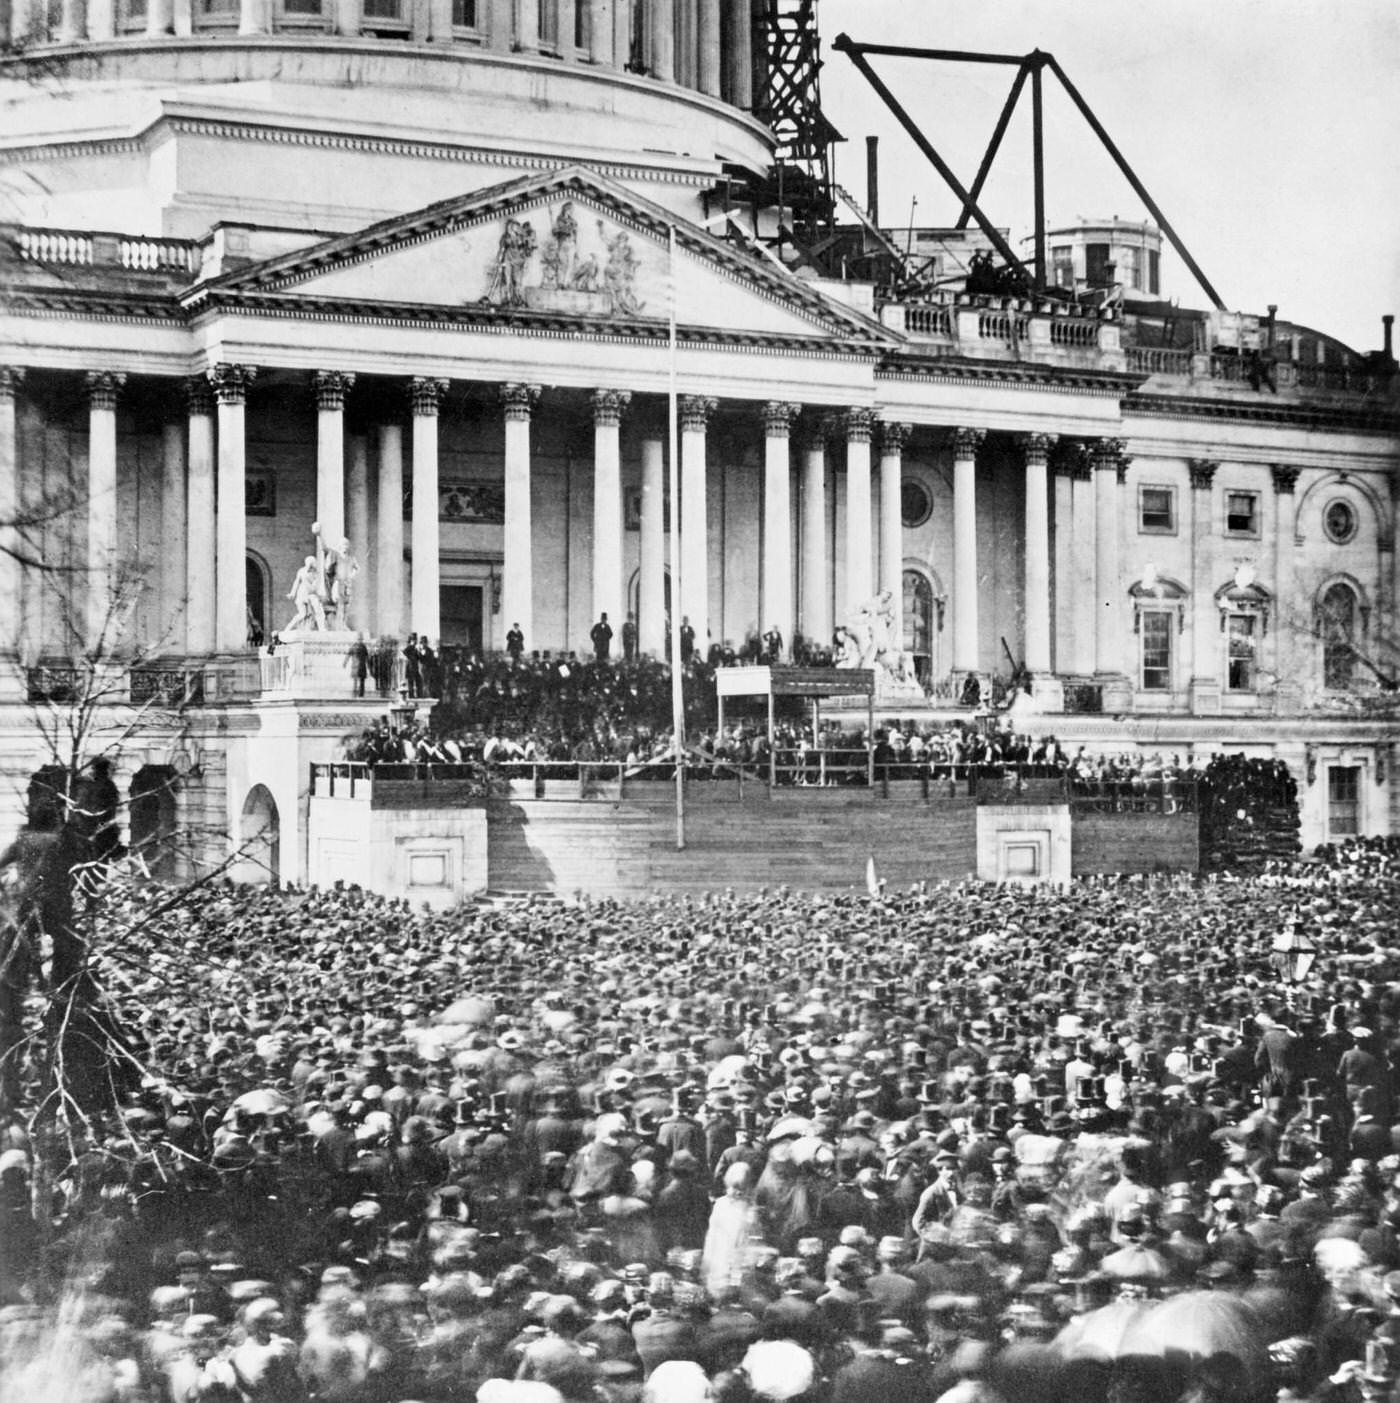 Large Crowd at Abraham Lincoln Inaugural Speech, 1860s